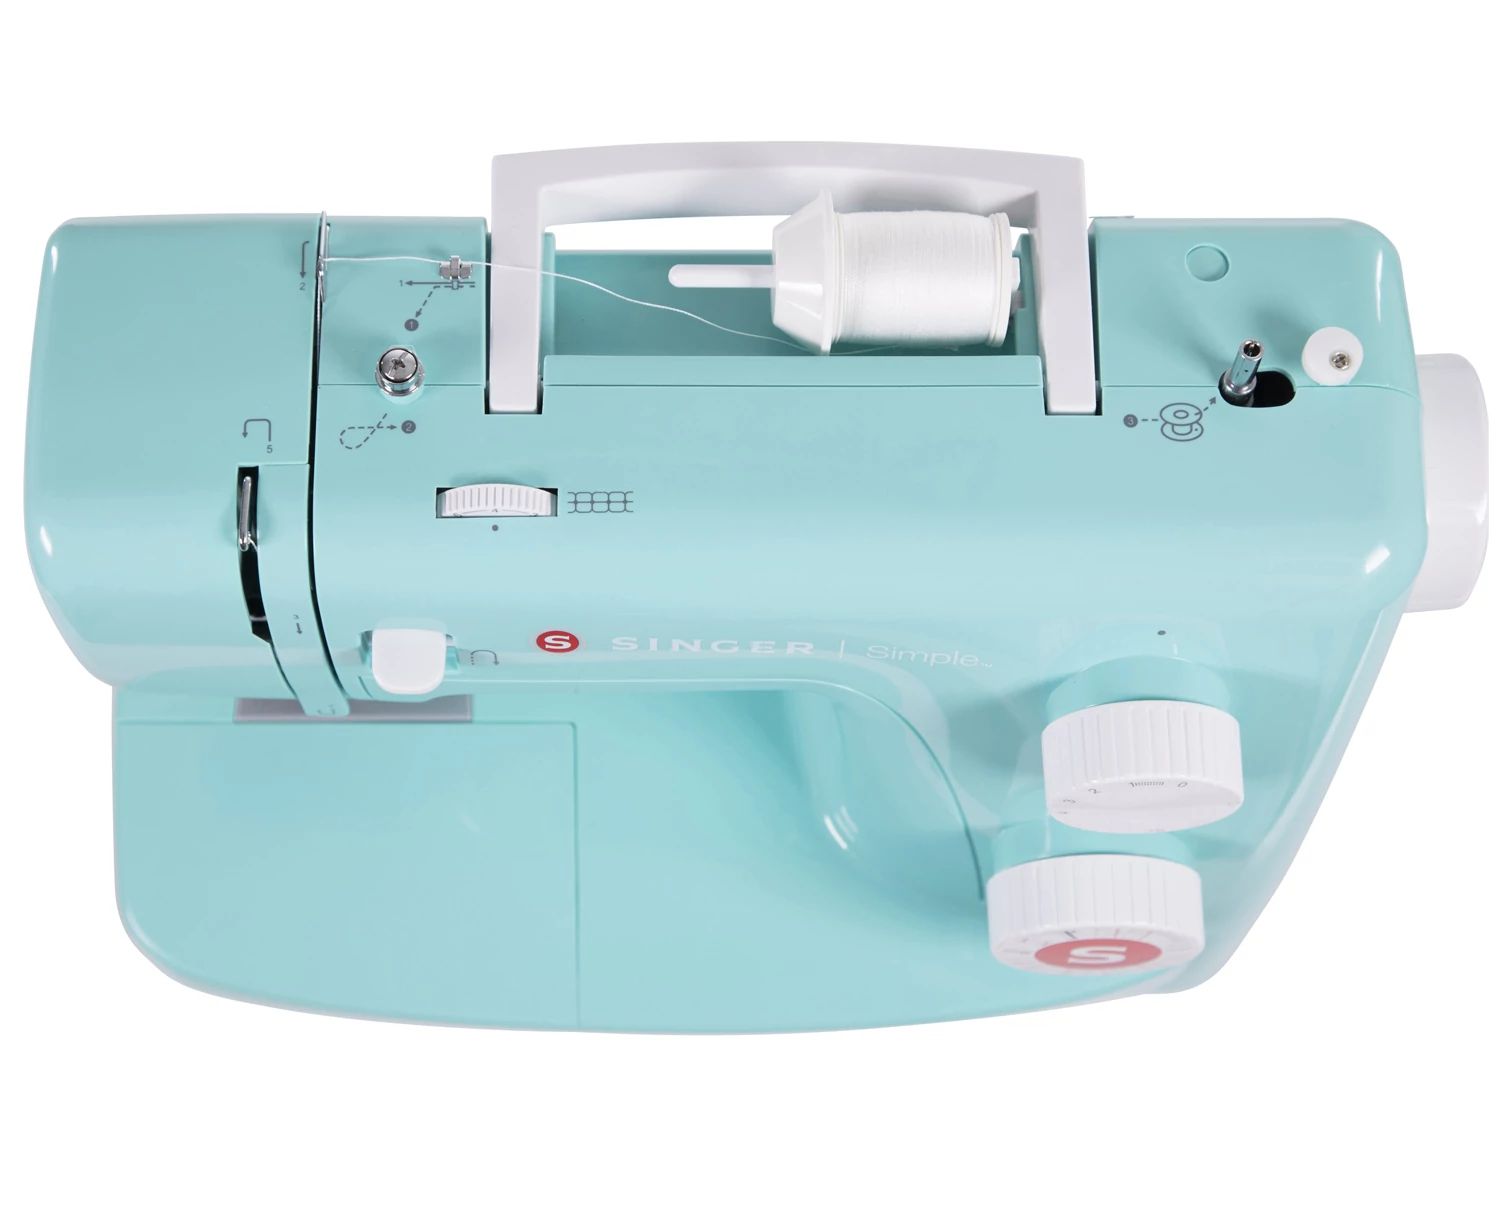 Simple™ 3223G Sewing Machine